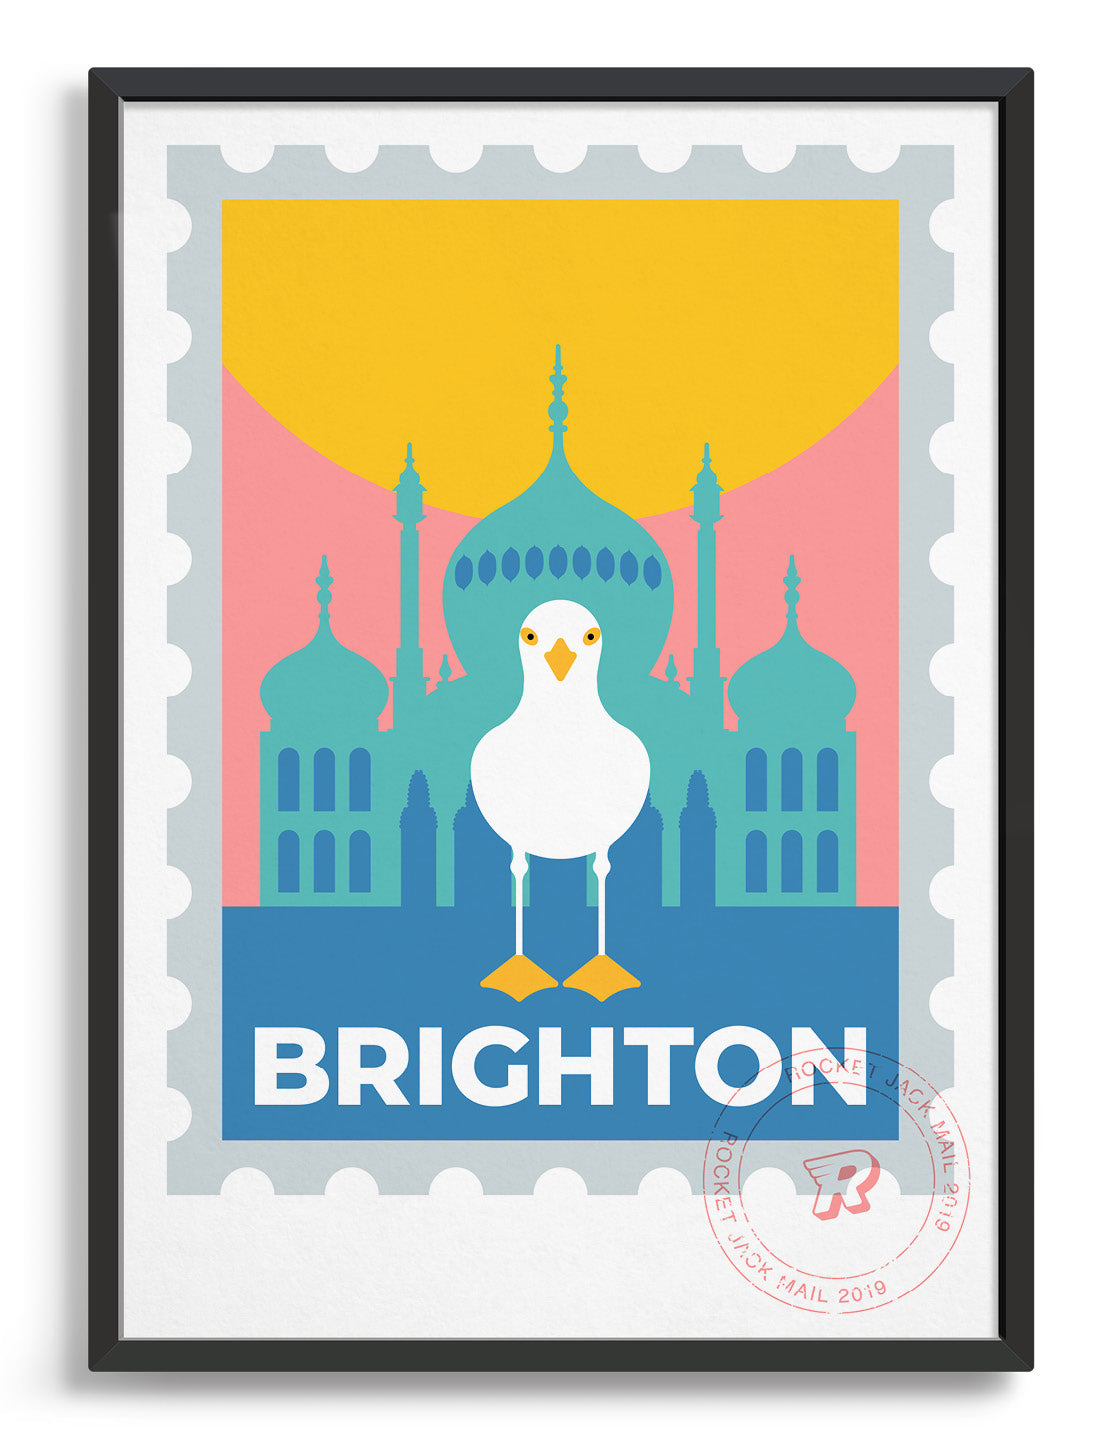 Brighton stamp poster, featuring the Royal Pavilion and a seagull standing on the Brighton text. 